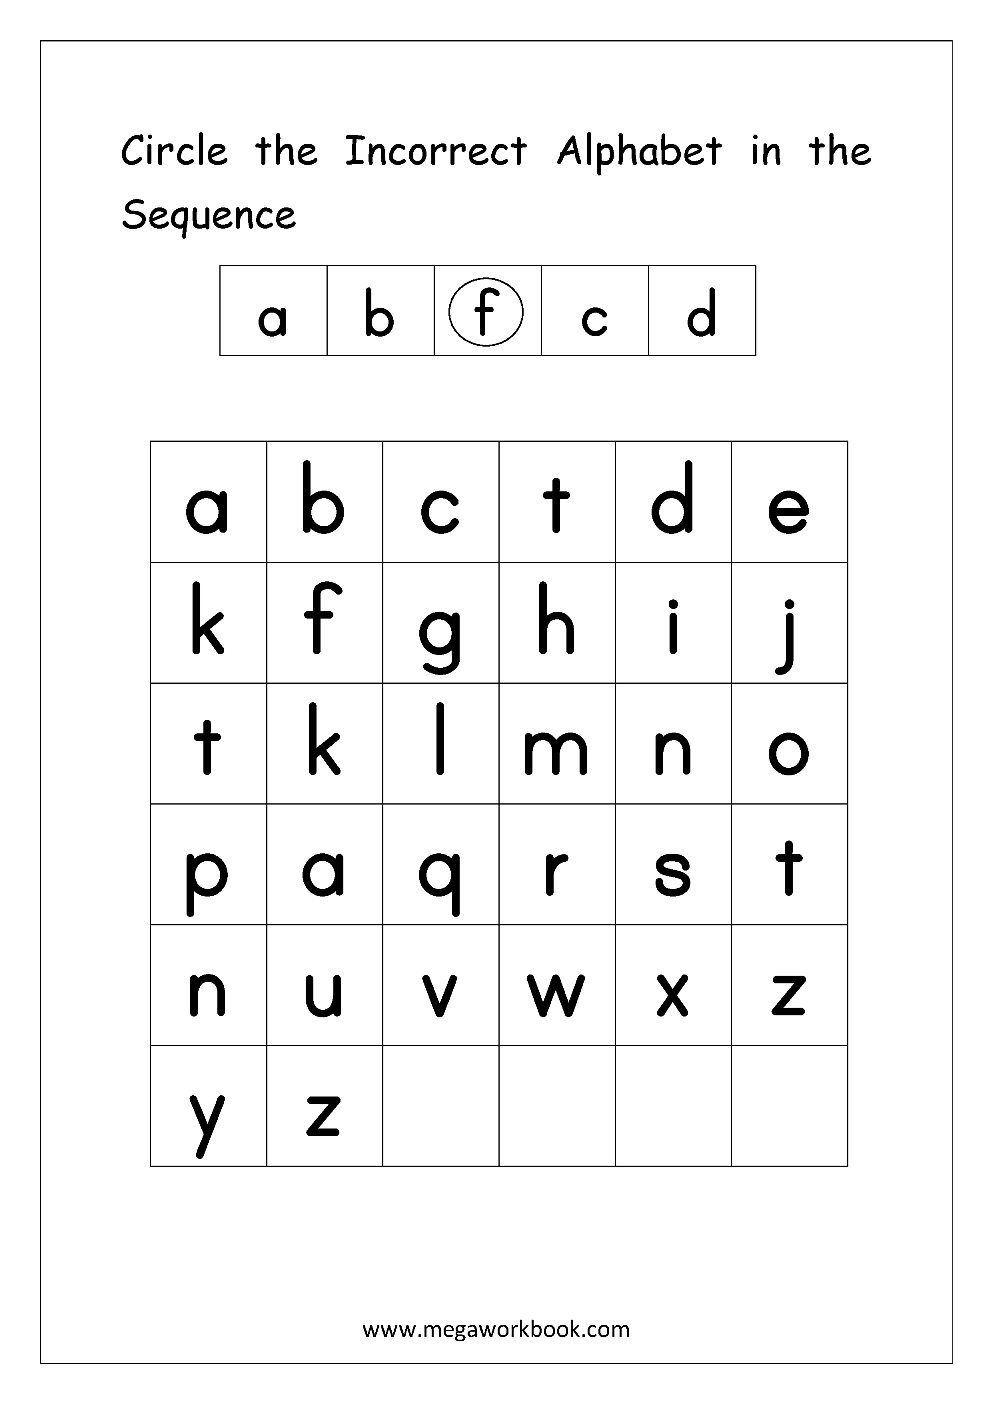 English Worksheets - Alphabetical Sequence | Free English intended for Alphabet Order Worksheets Printable